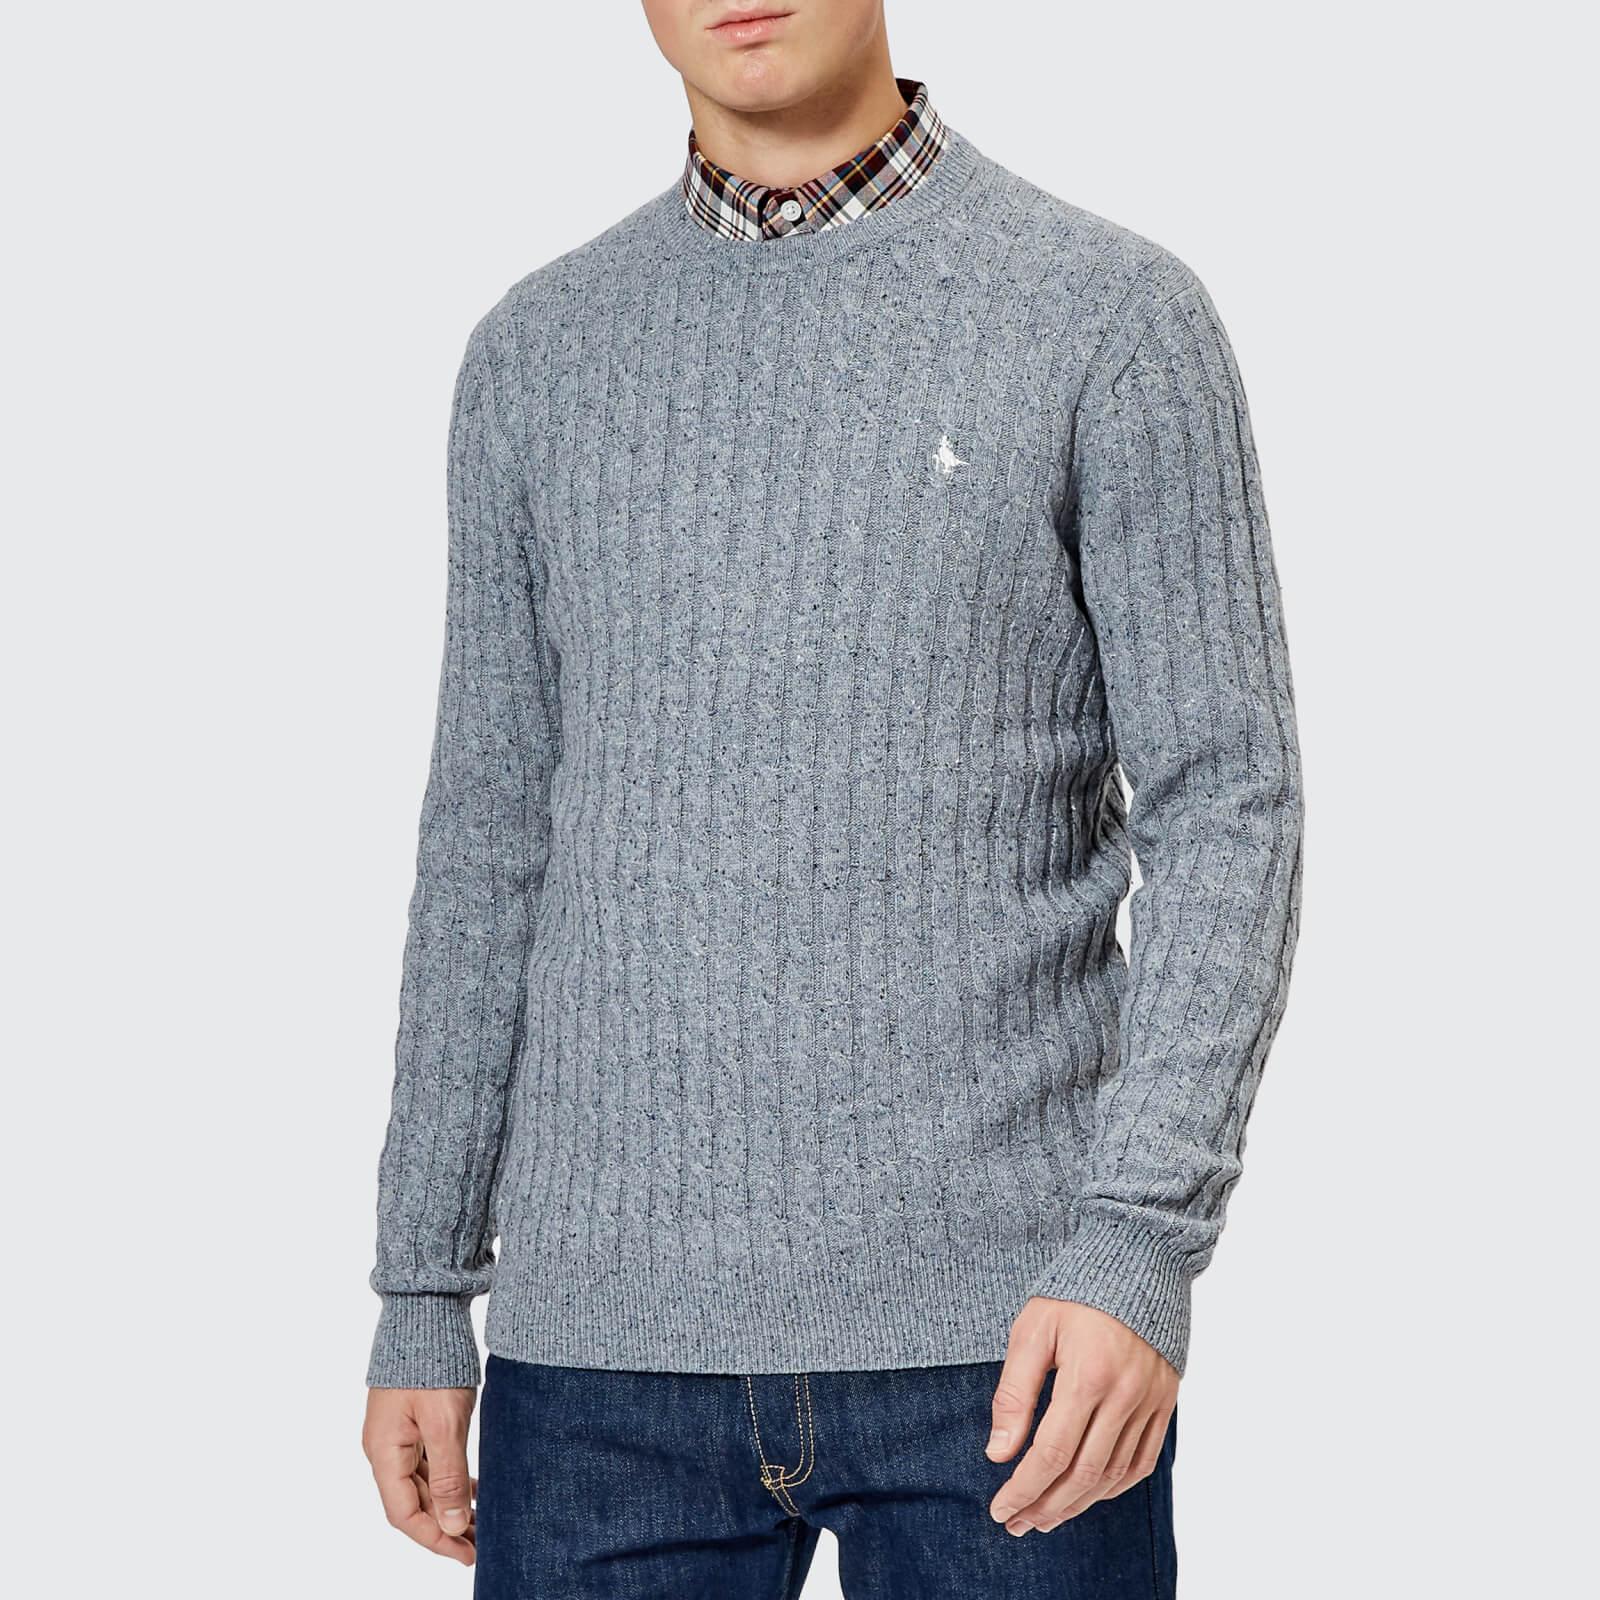 Jack Wills Wool Marlow Cable Knit Jumper in Grey (Gray) for Men - Lyst